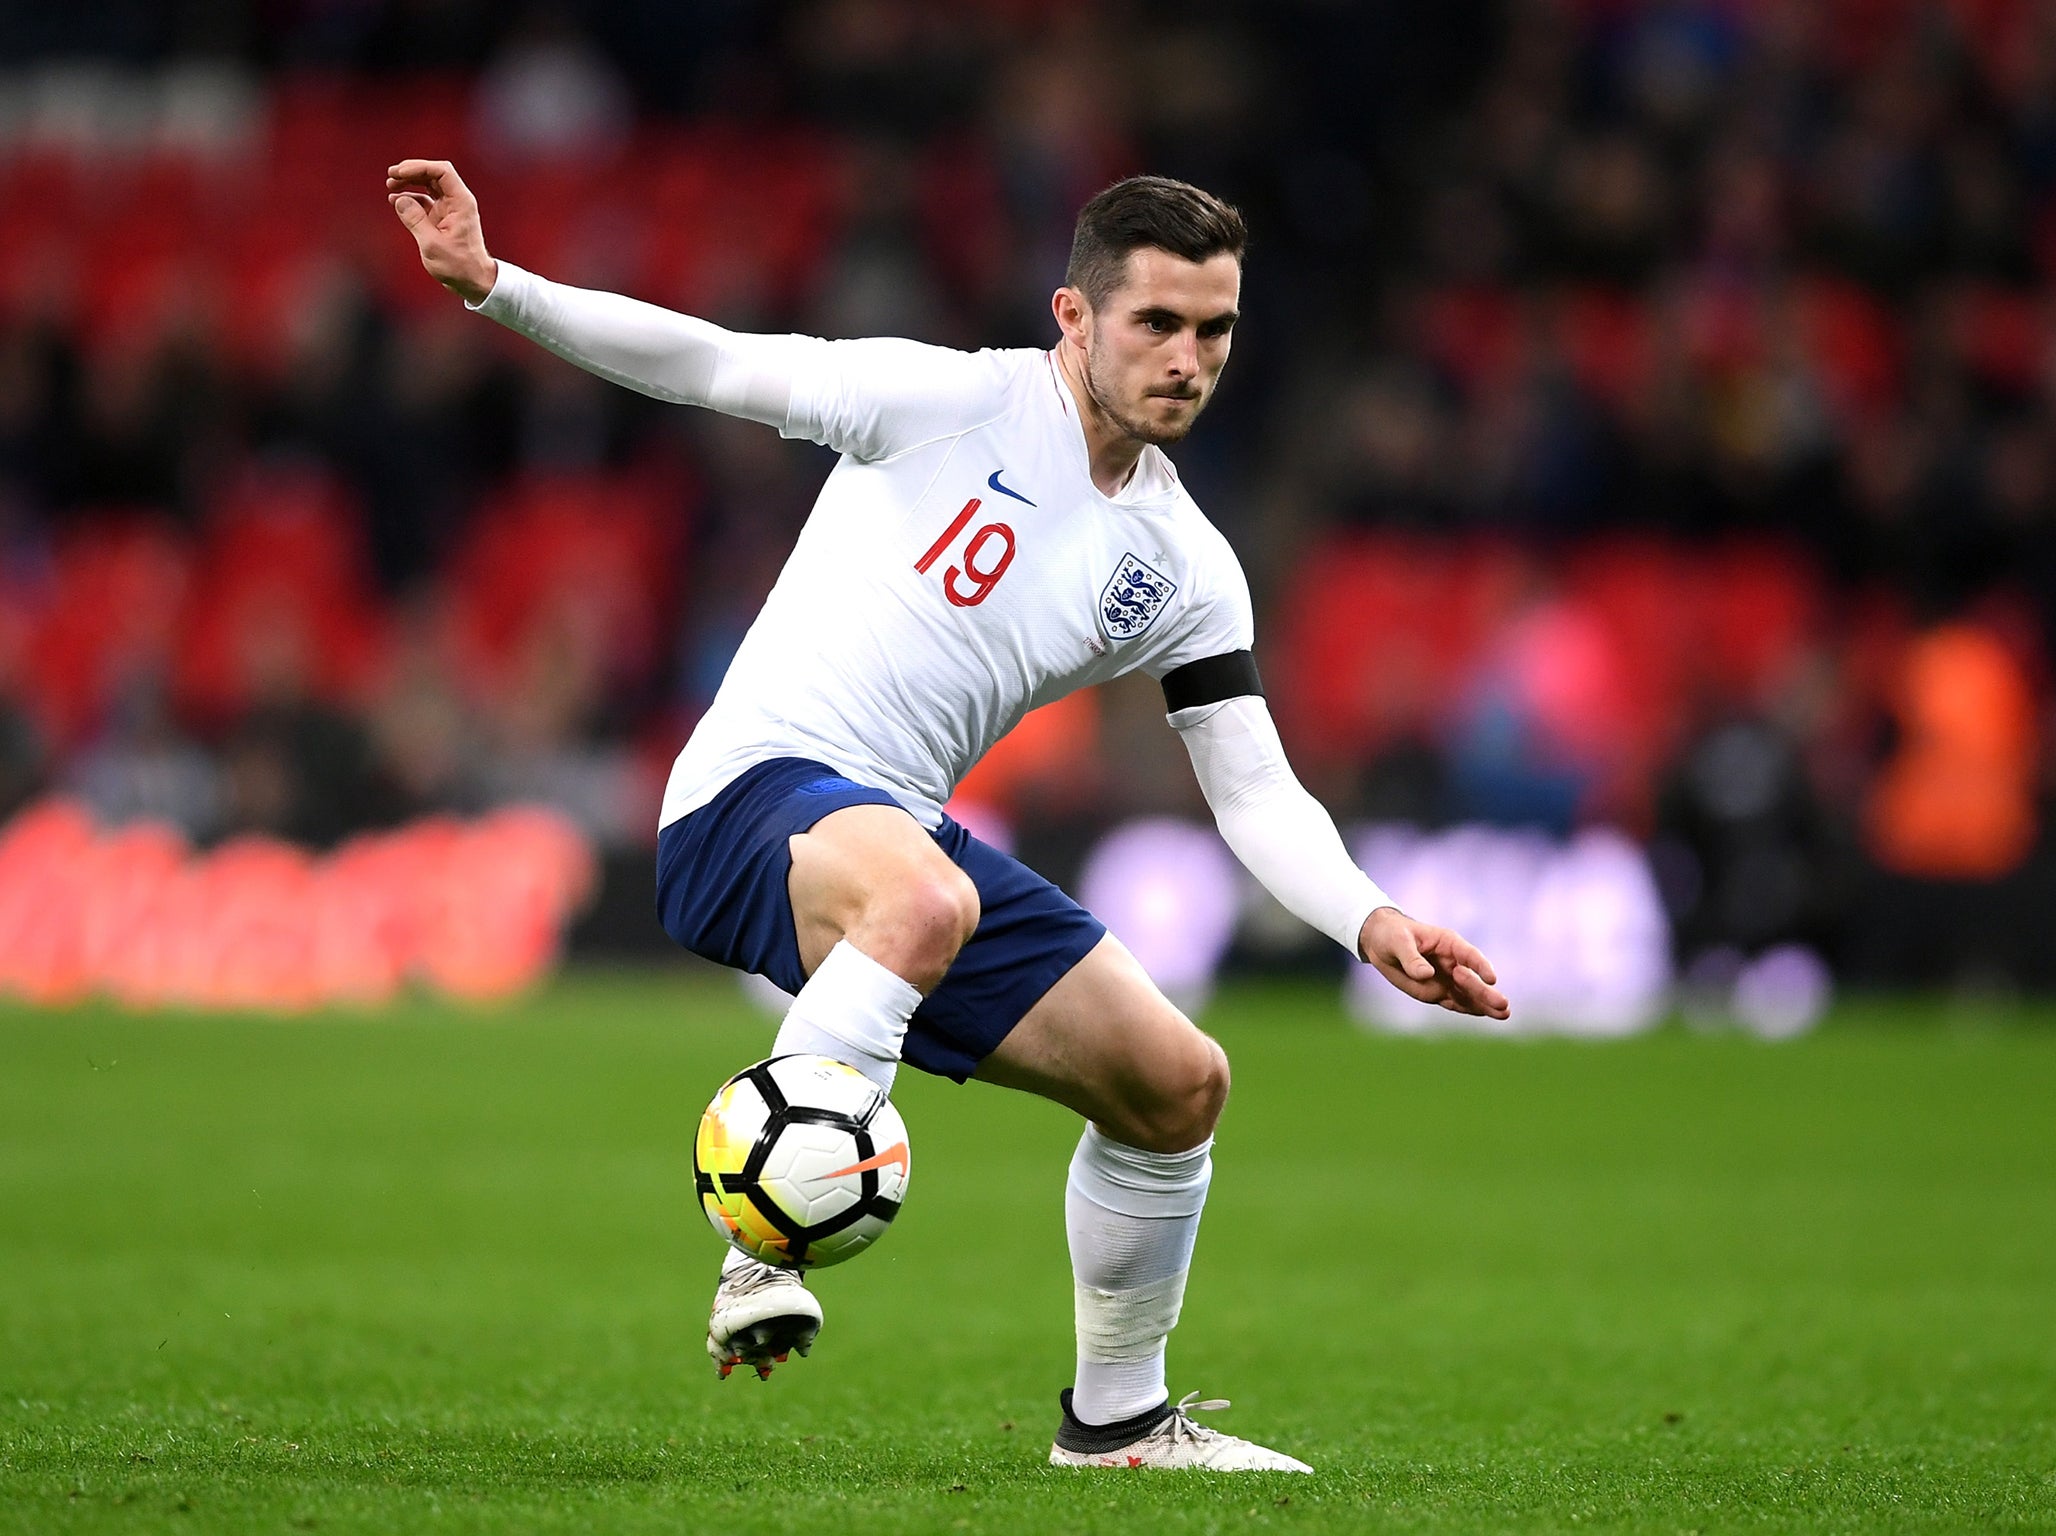 Lewis Cook featured for England against Italy